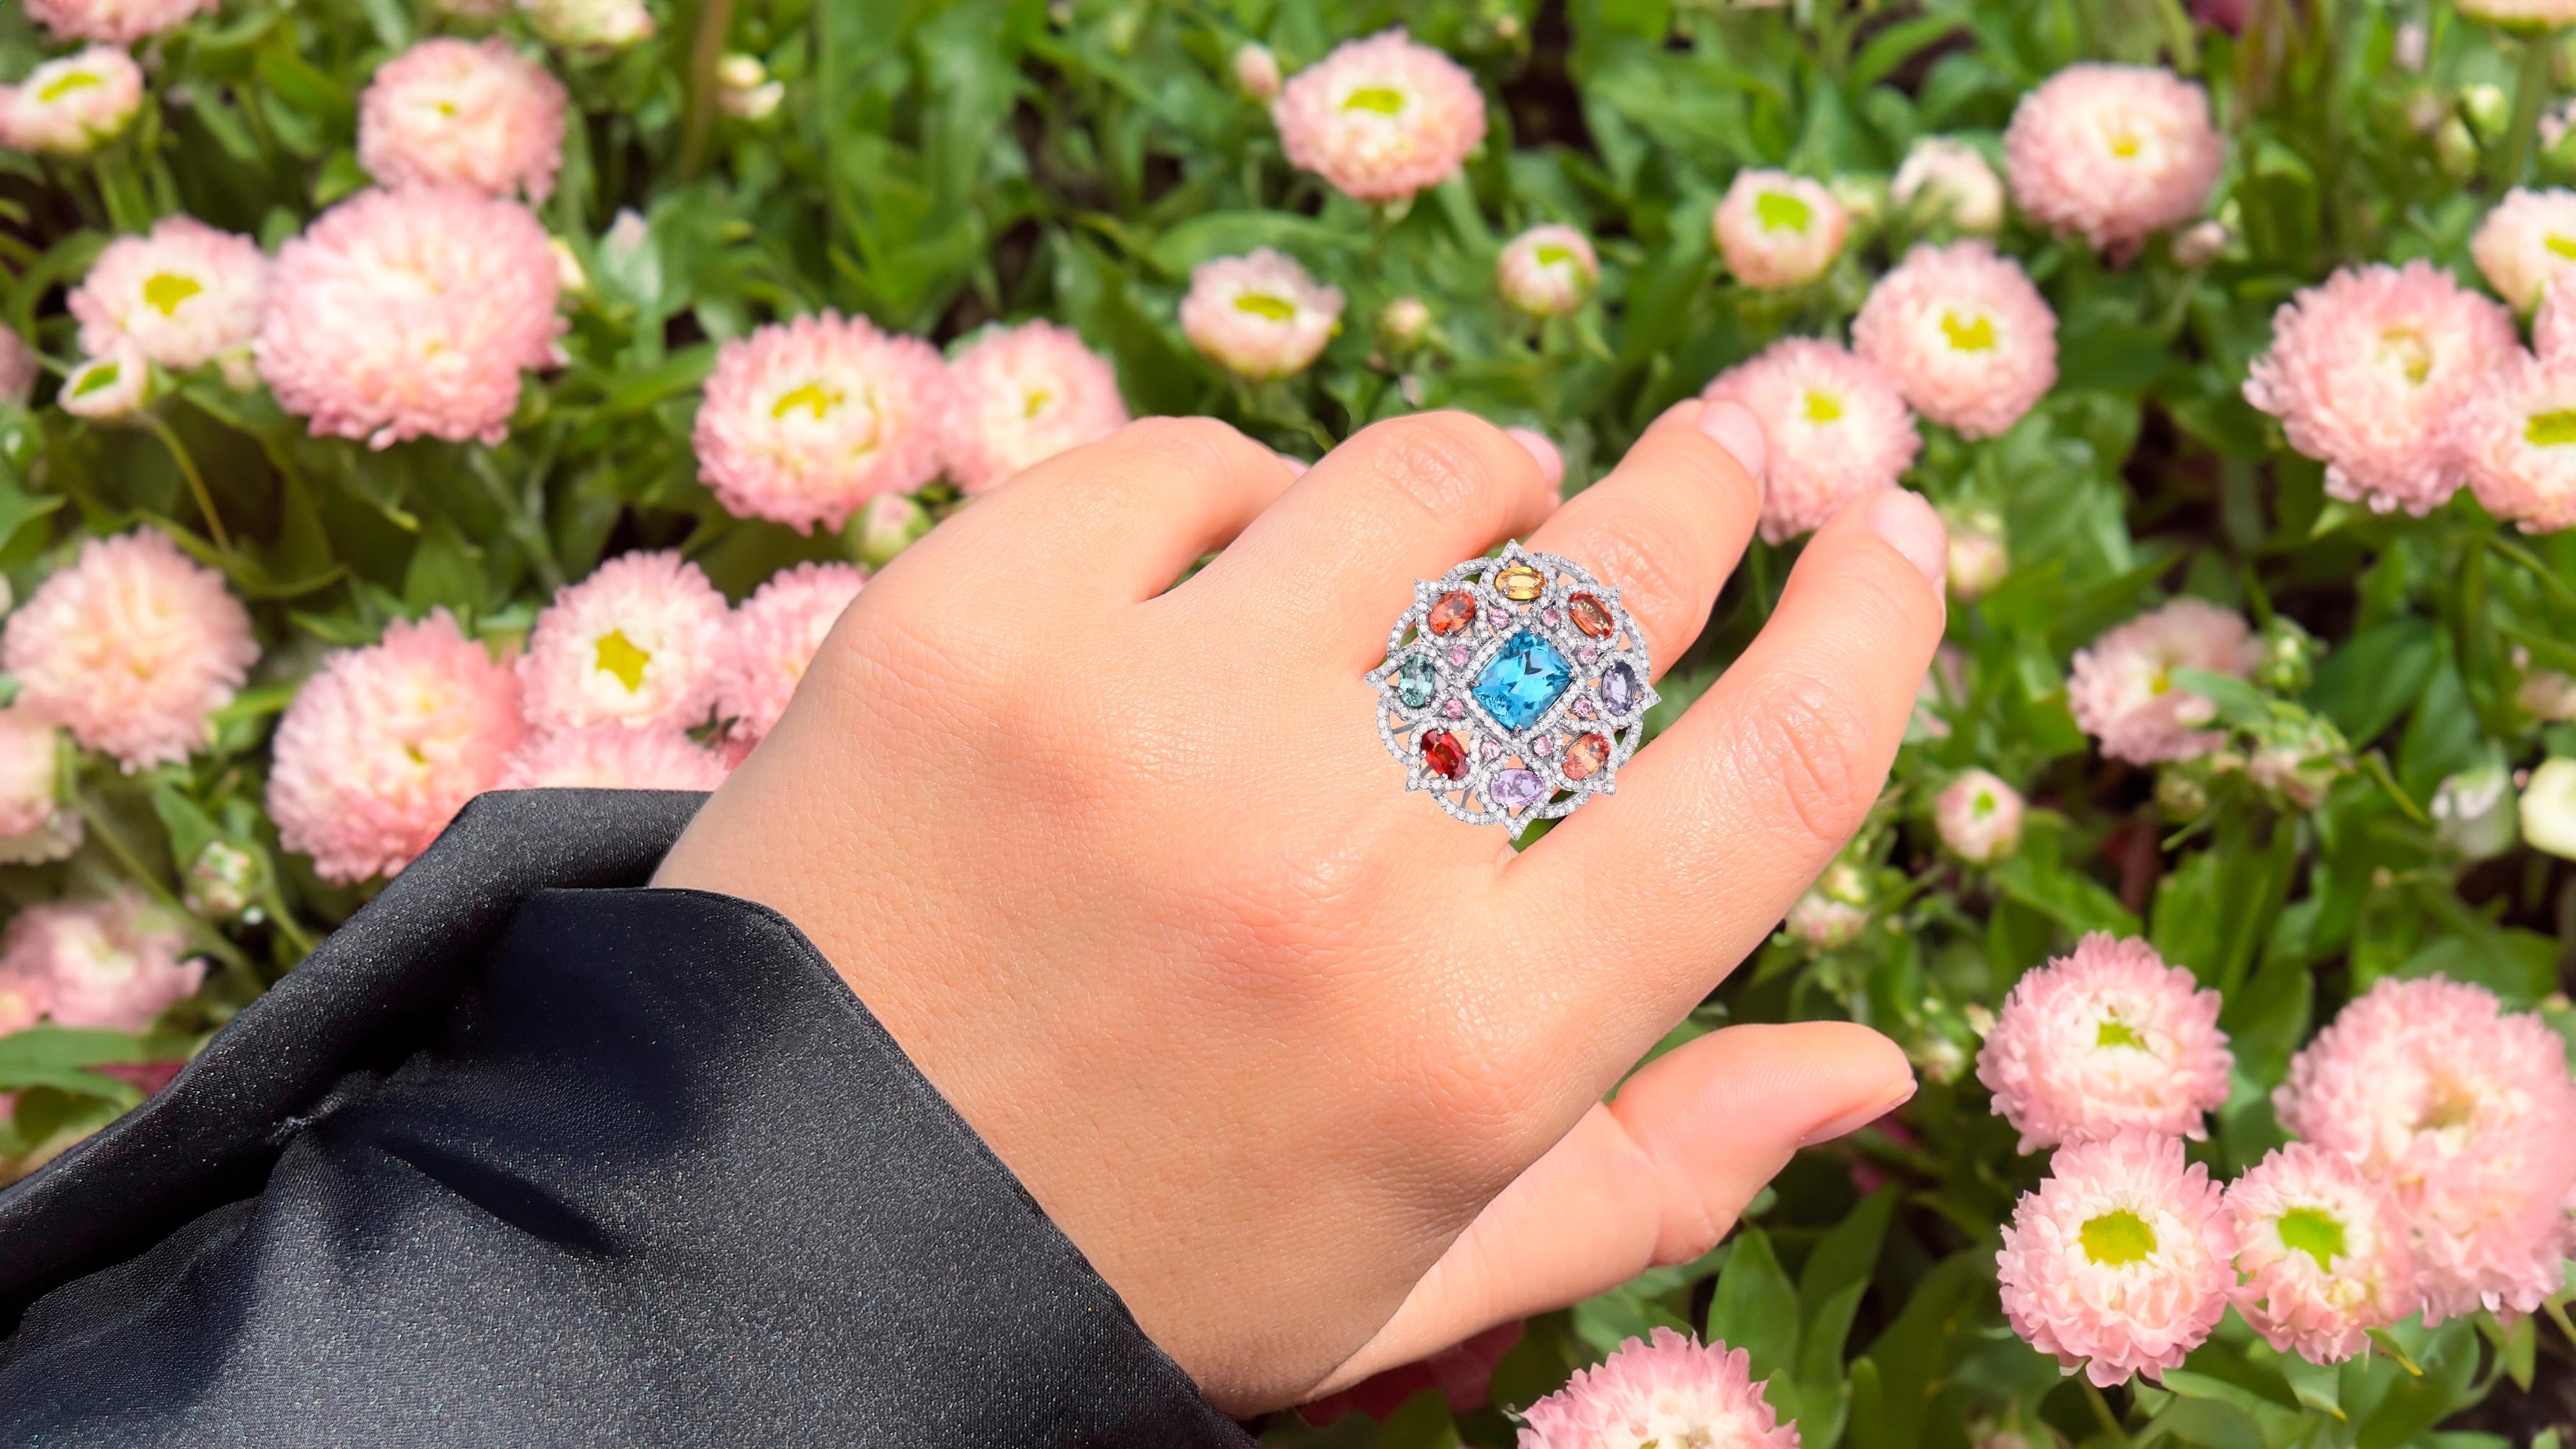 Radiant Cut Blue Topaz Ring With Multicolored Sapphires Tourmalines & Diamonds 11.18 Carats For Sale